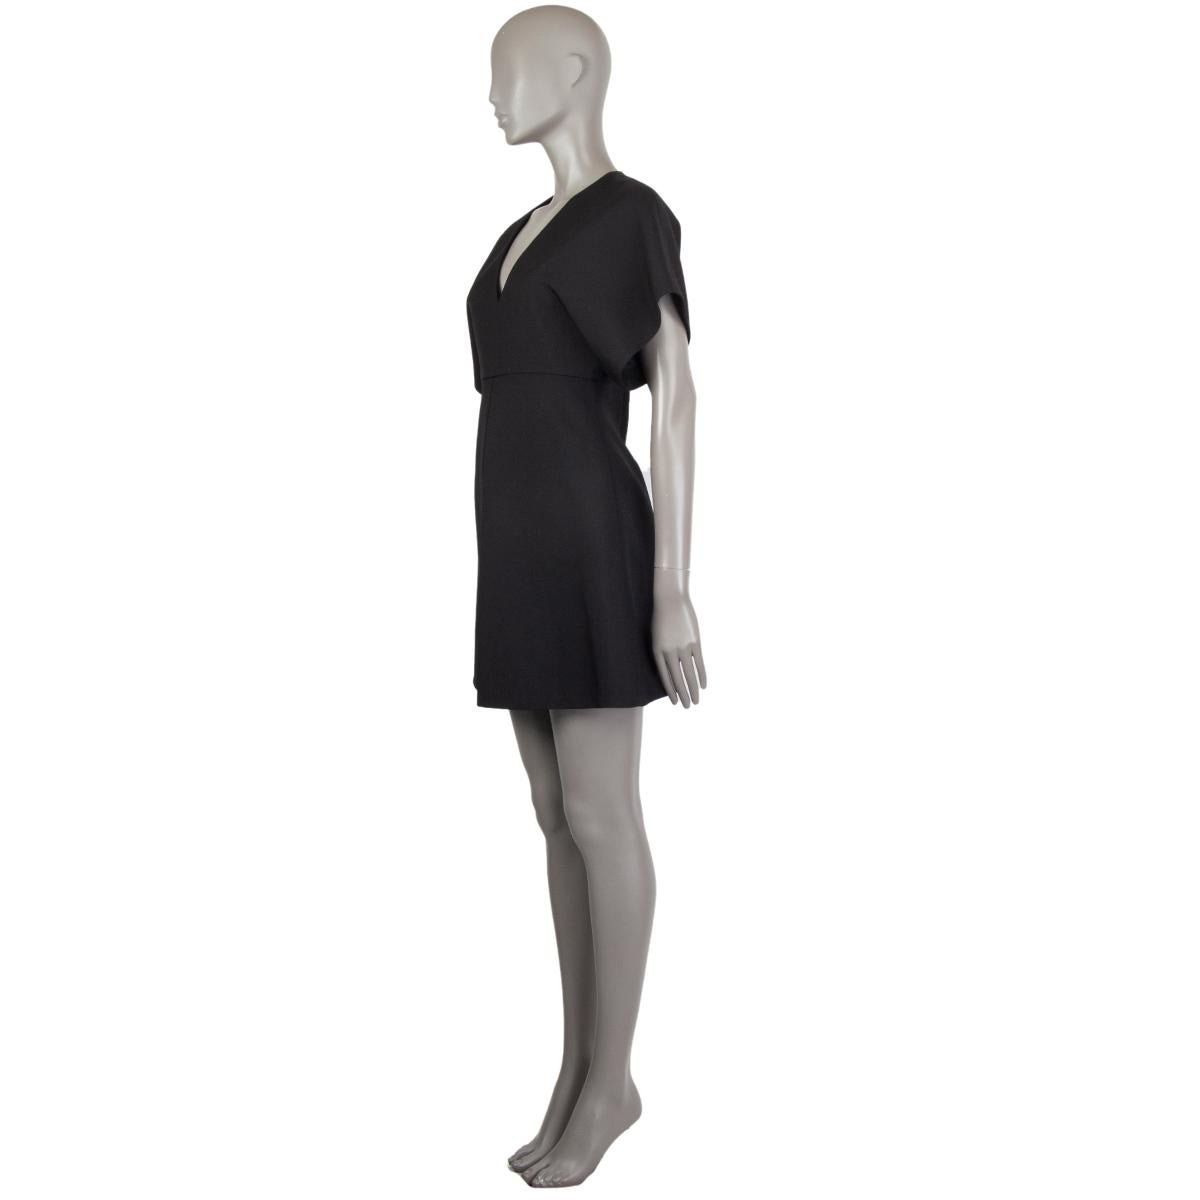 Saint Laurent mini dress in black virgin wool (100%). With kimono sleeves, v neck, empire waist, and box pleat on the front. Closes with invisible zipper on the back. Lined in black silk (100%). Has been worn and is in excellent condition. 

Tag